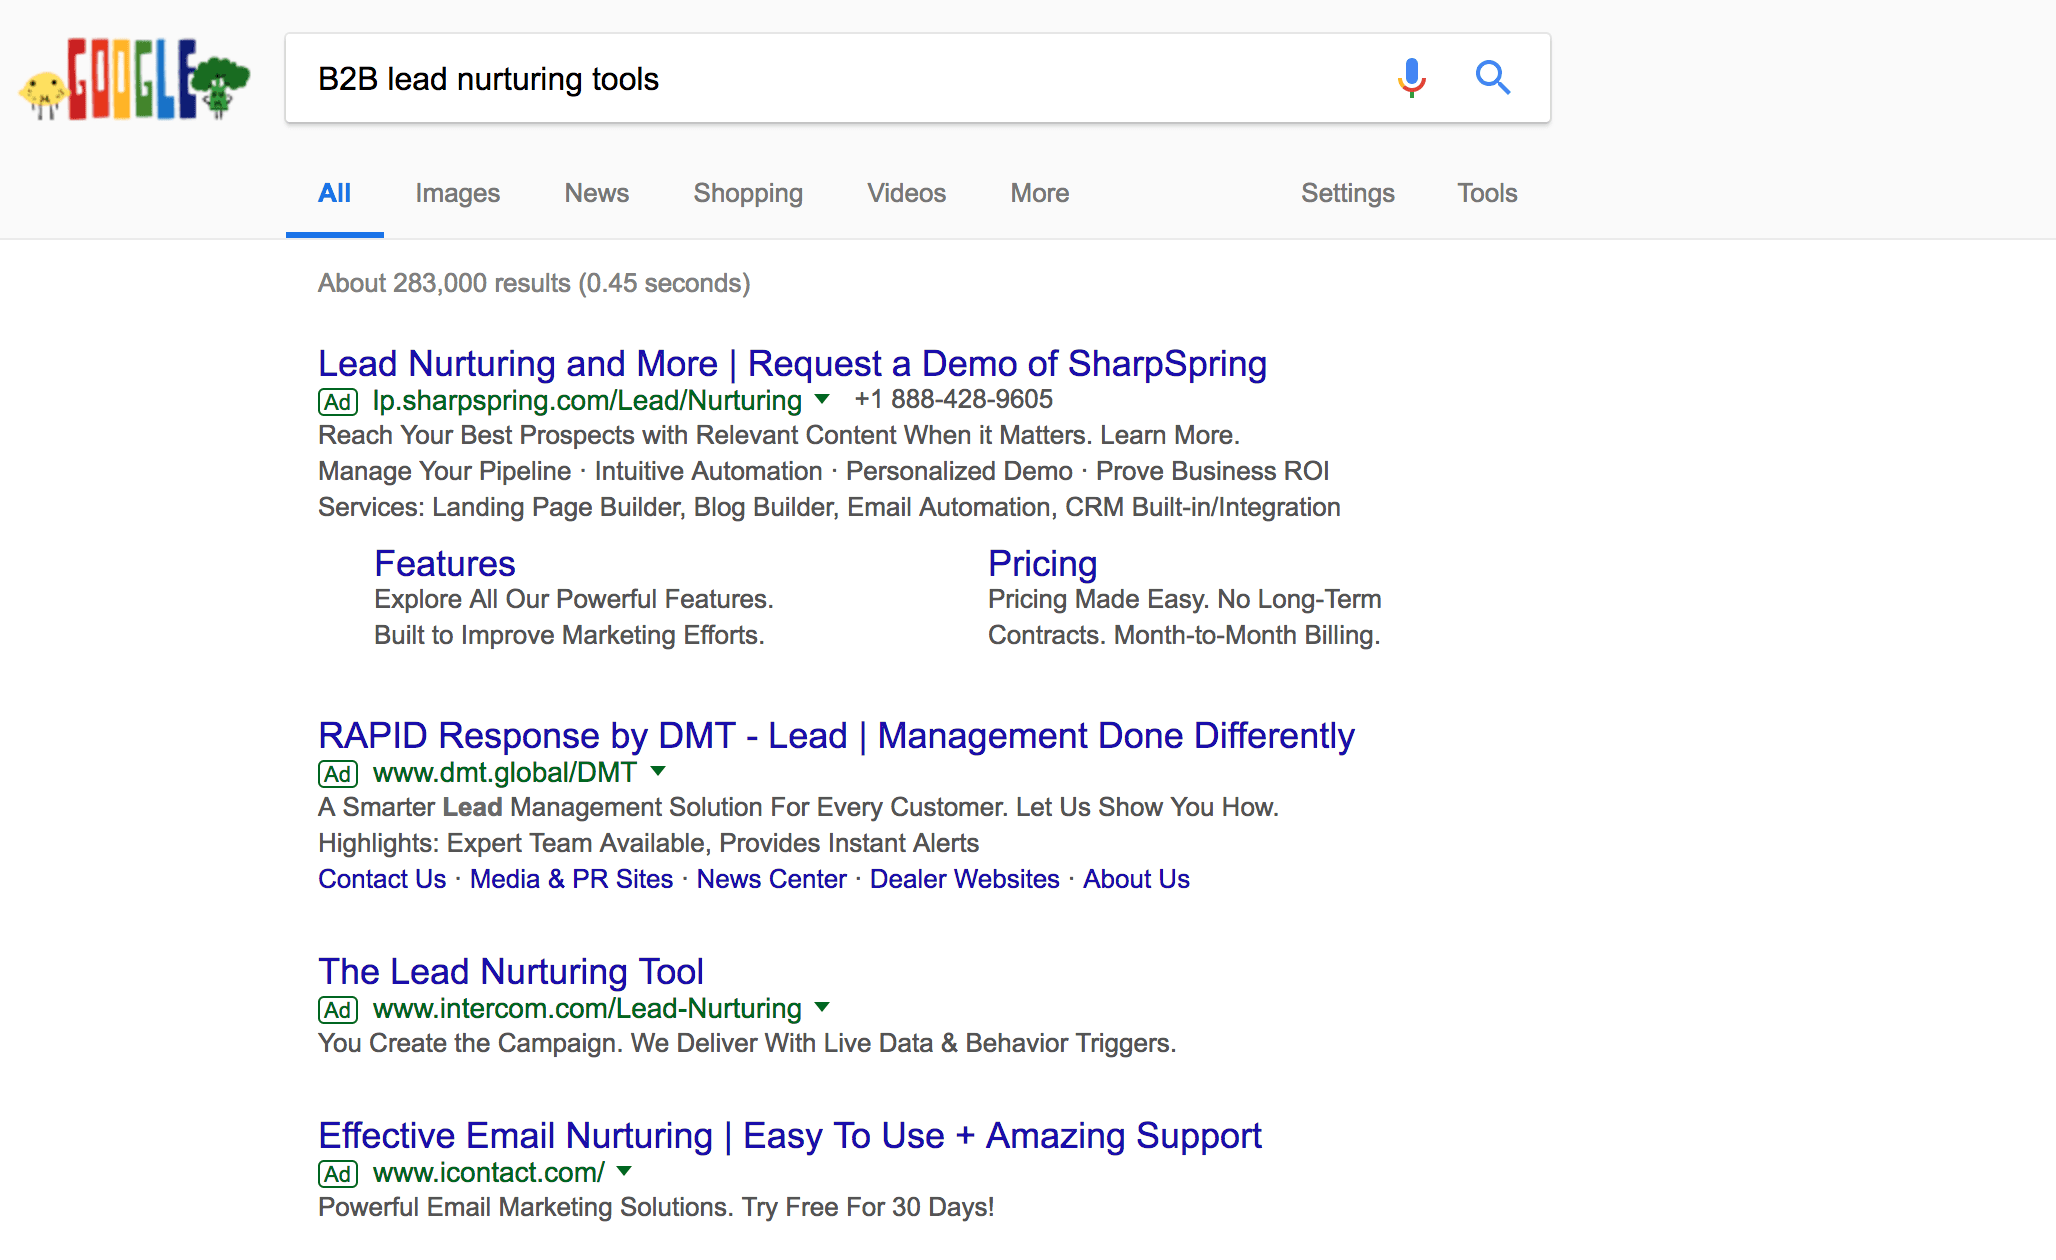 Search engine results for "B2B Lead Nurturing Tools"